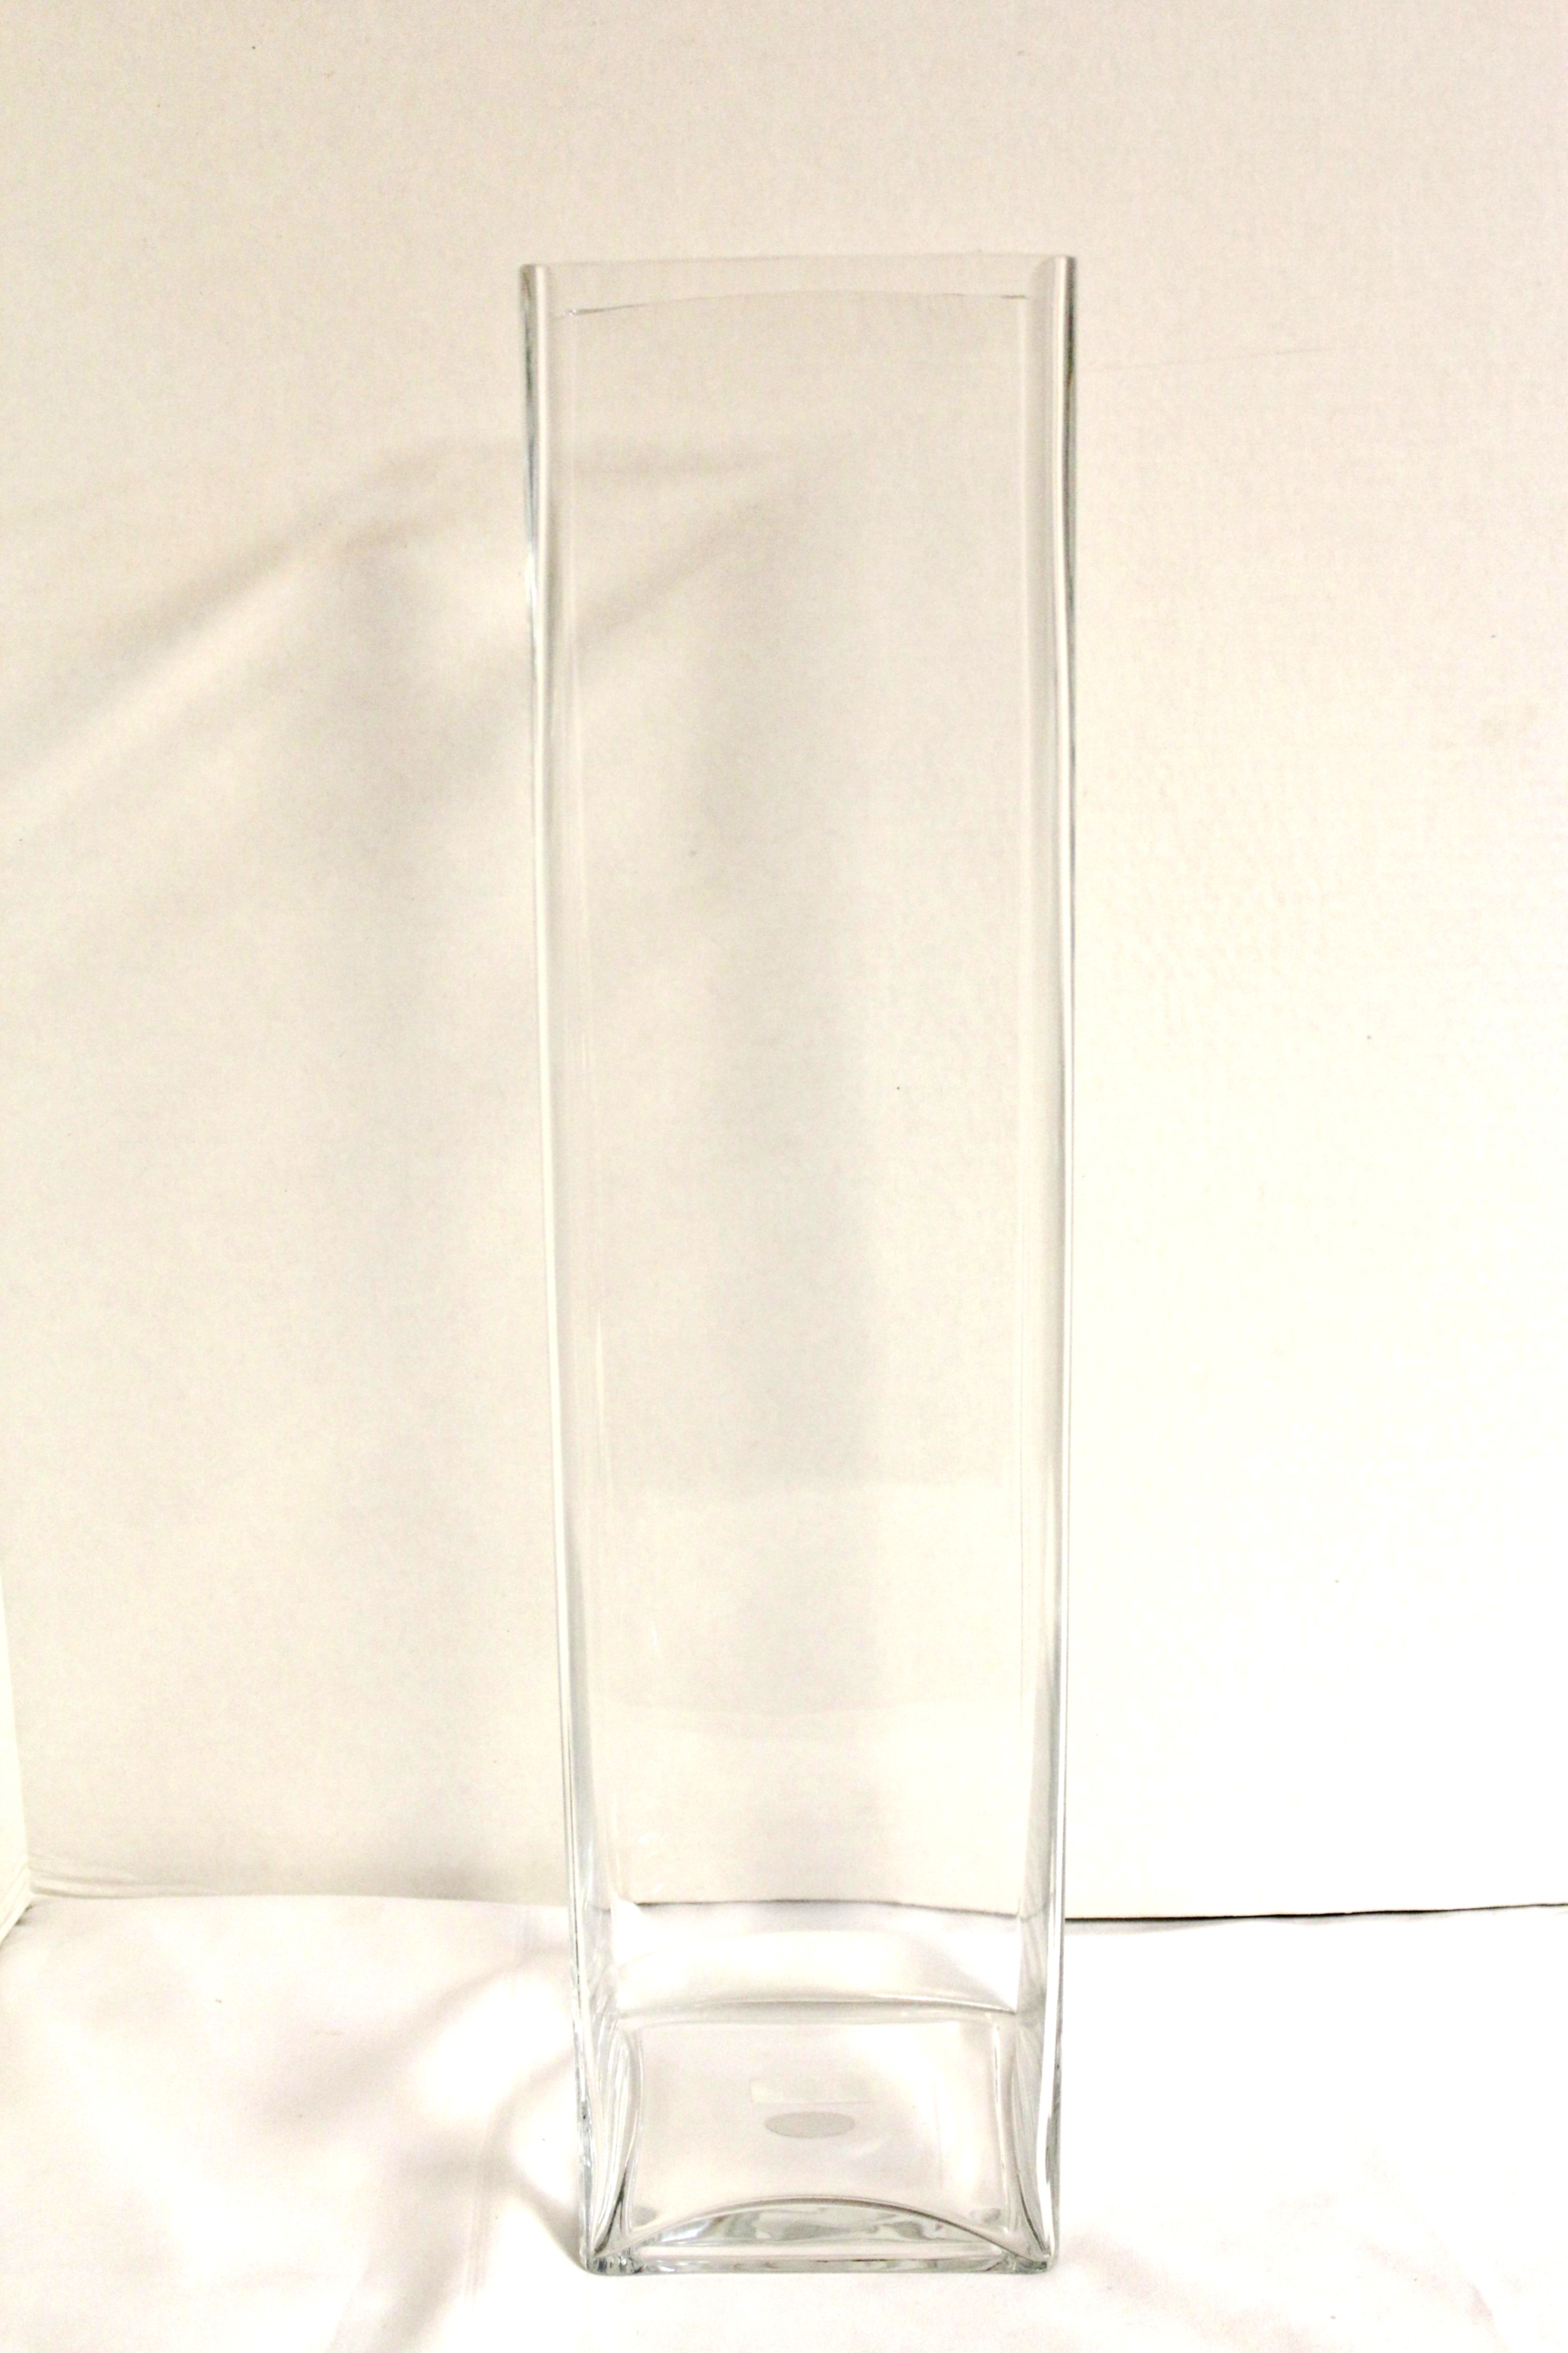 5 x 8 cylinder vase of square glass dish garden 4x 8 possible provision pinterest throughout square glass dish garden 4x 8 possible provision pinterest pictures